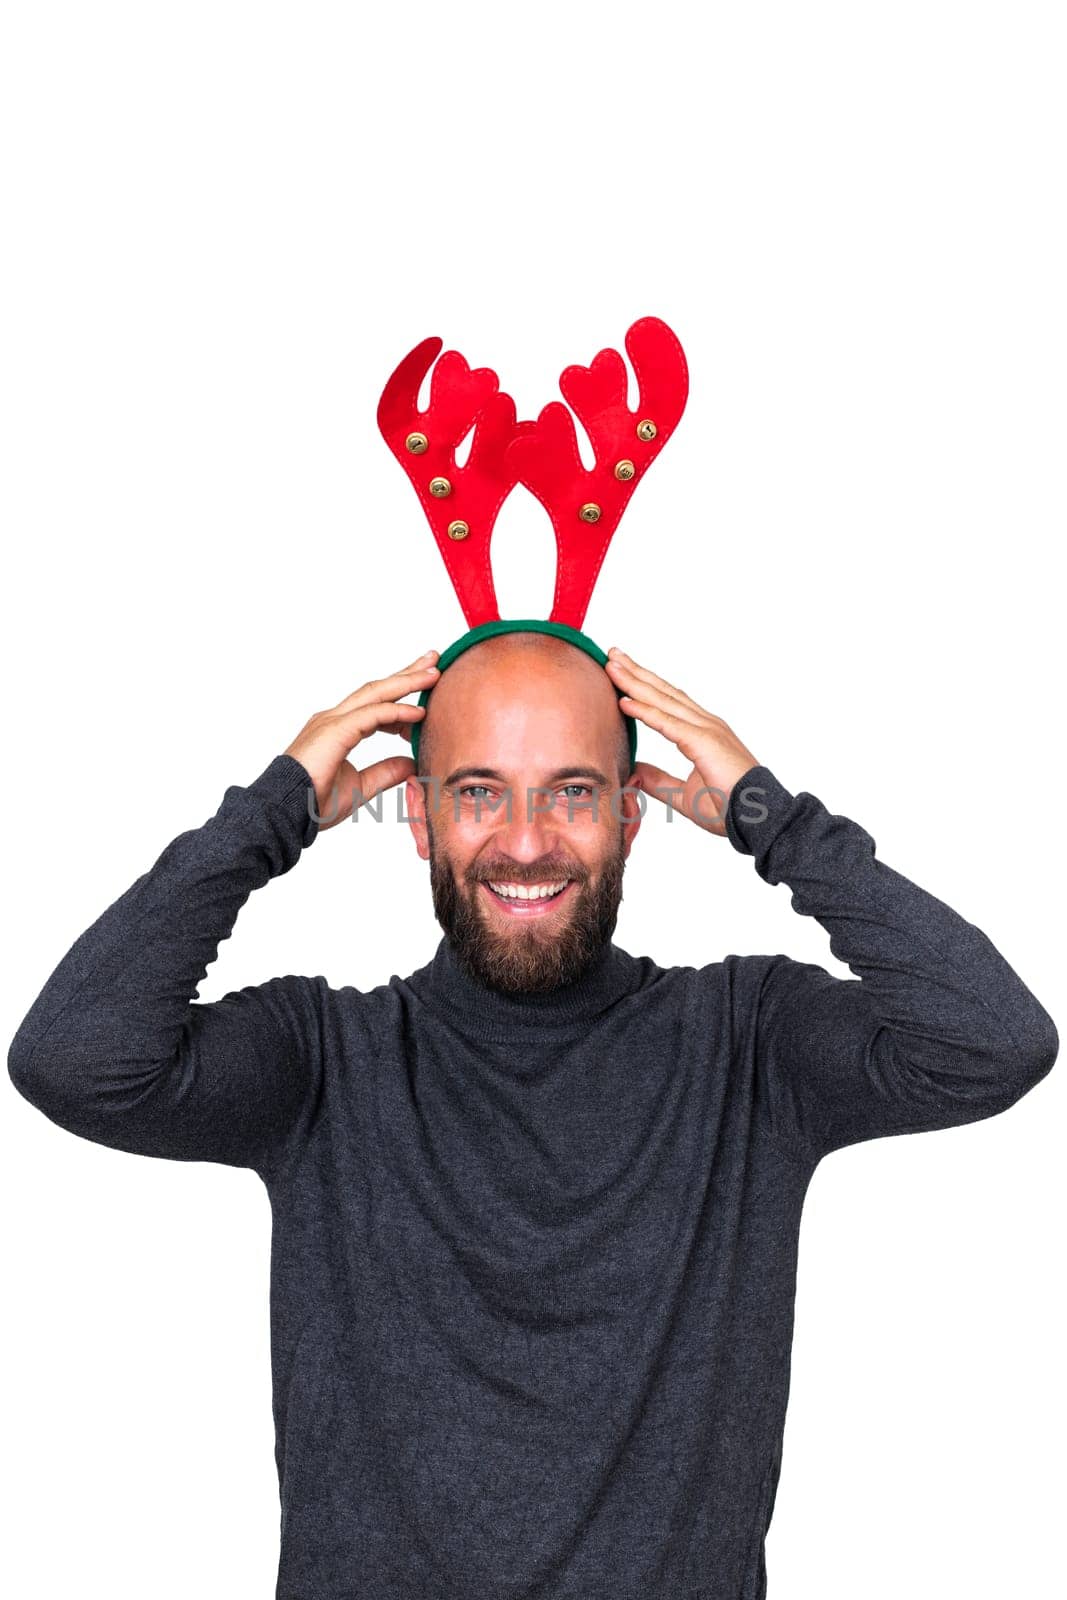 Smiling young caucasian man with Christmas reindeer antlers looking at camera. Isolated on white background. Vertical image. Holiday concept.